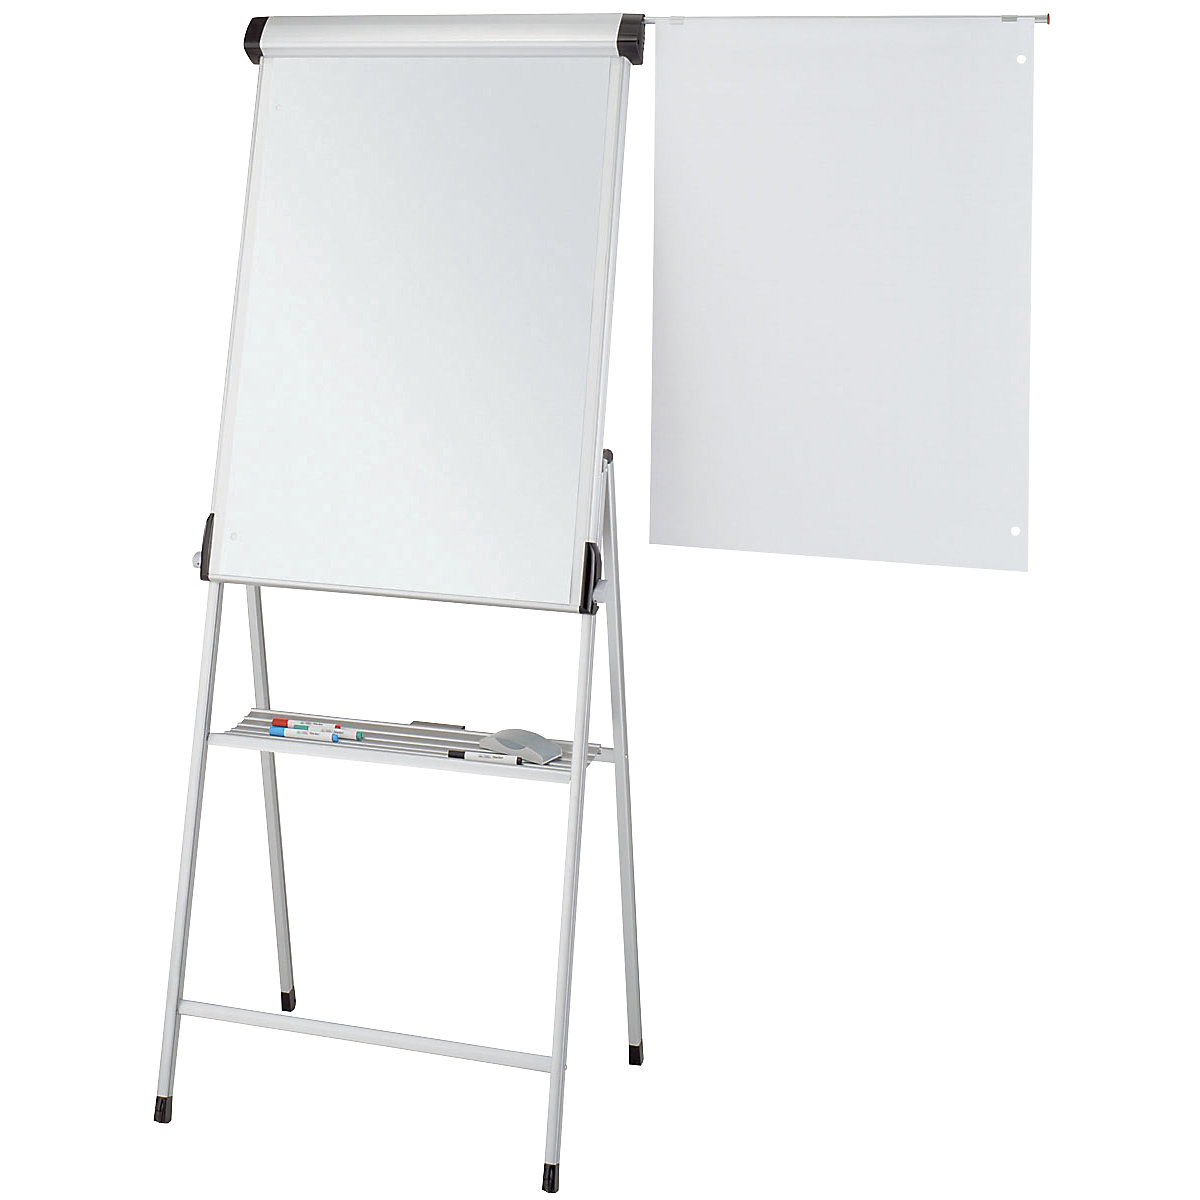 Flip Chart Stand with wheel FC1511 – Cater Qatar